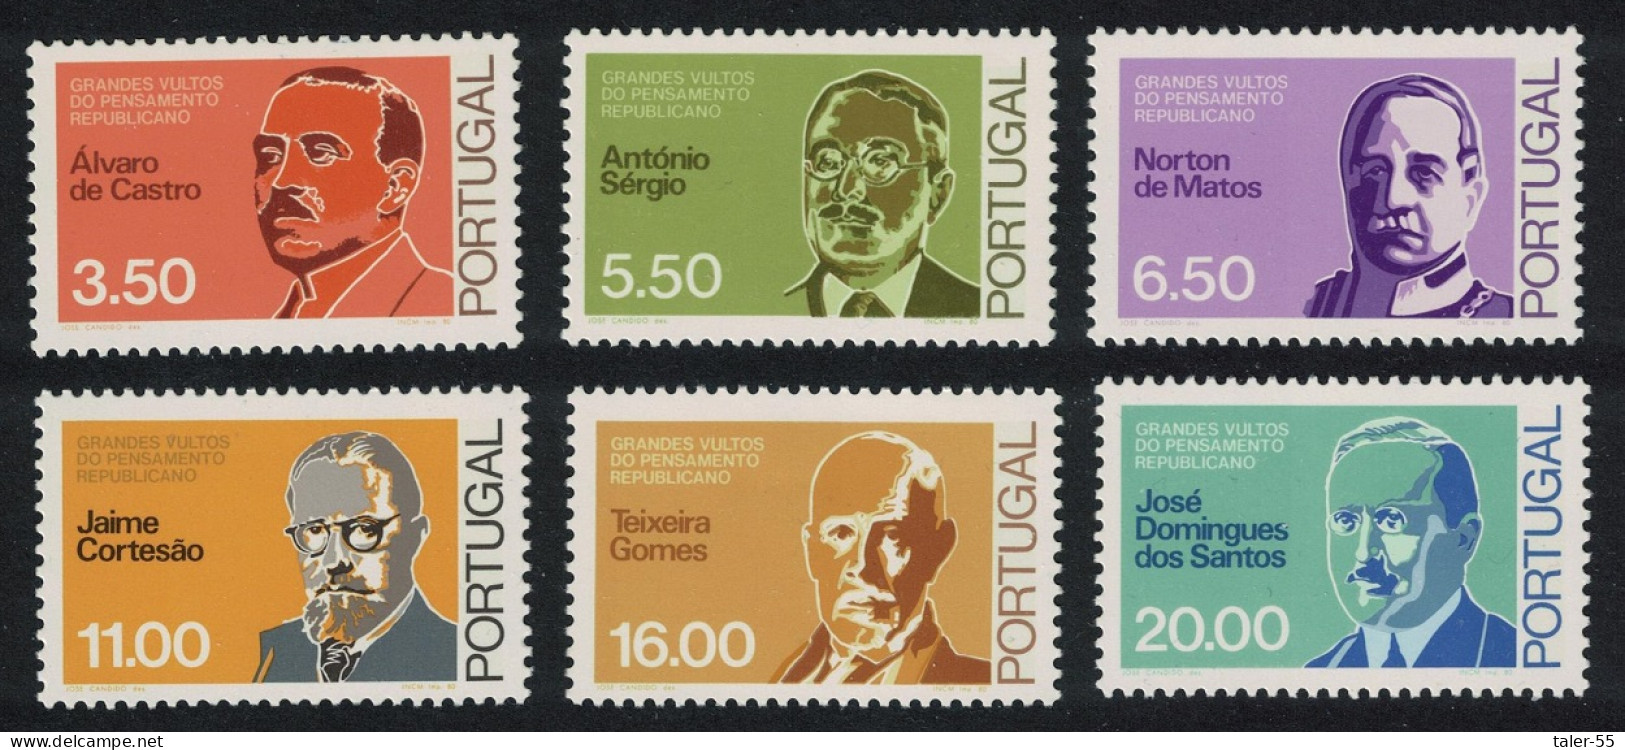 Portugal Republican Personalities 2nd Series 6v 1980 MNH SG#1787-1792 - Neufs